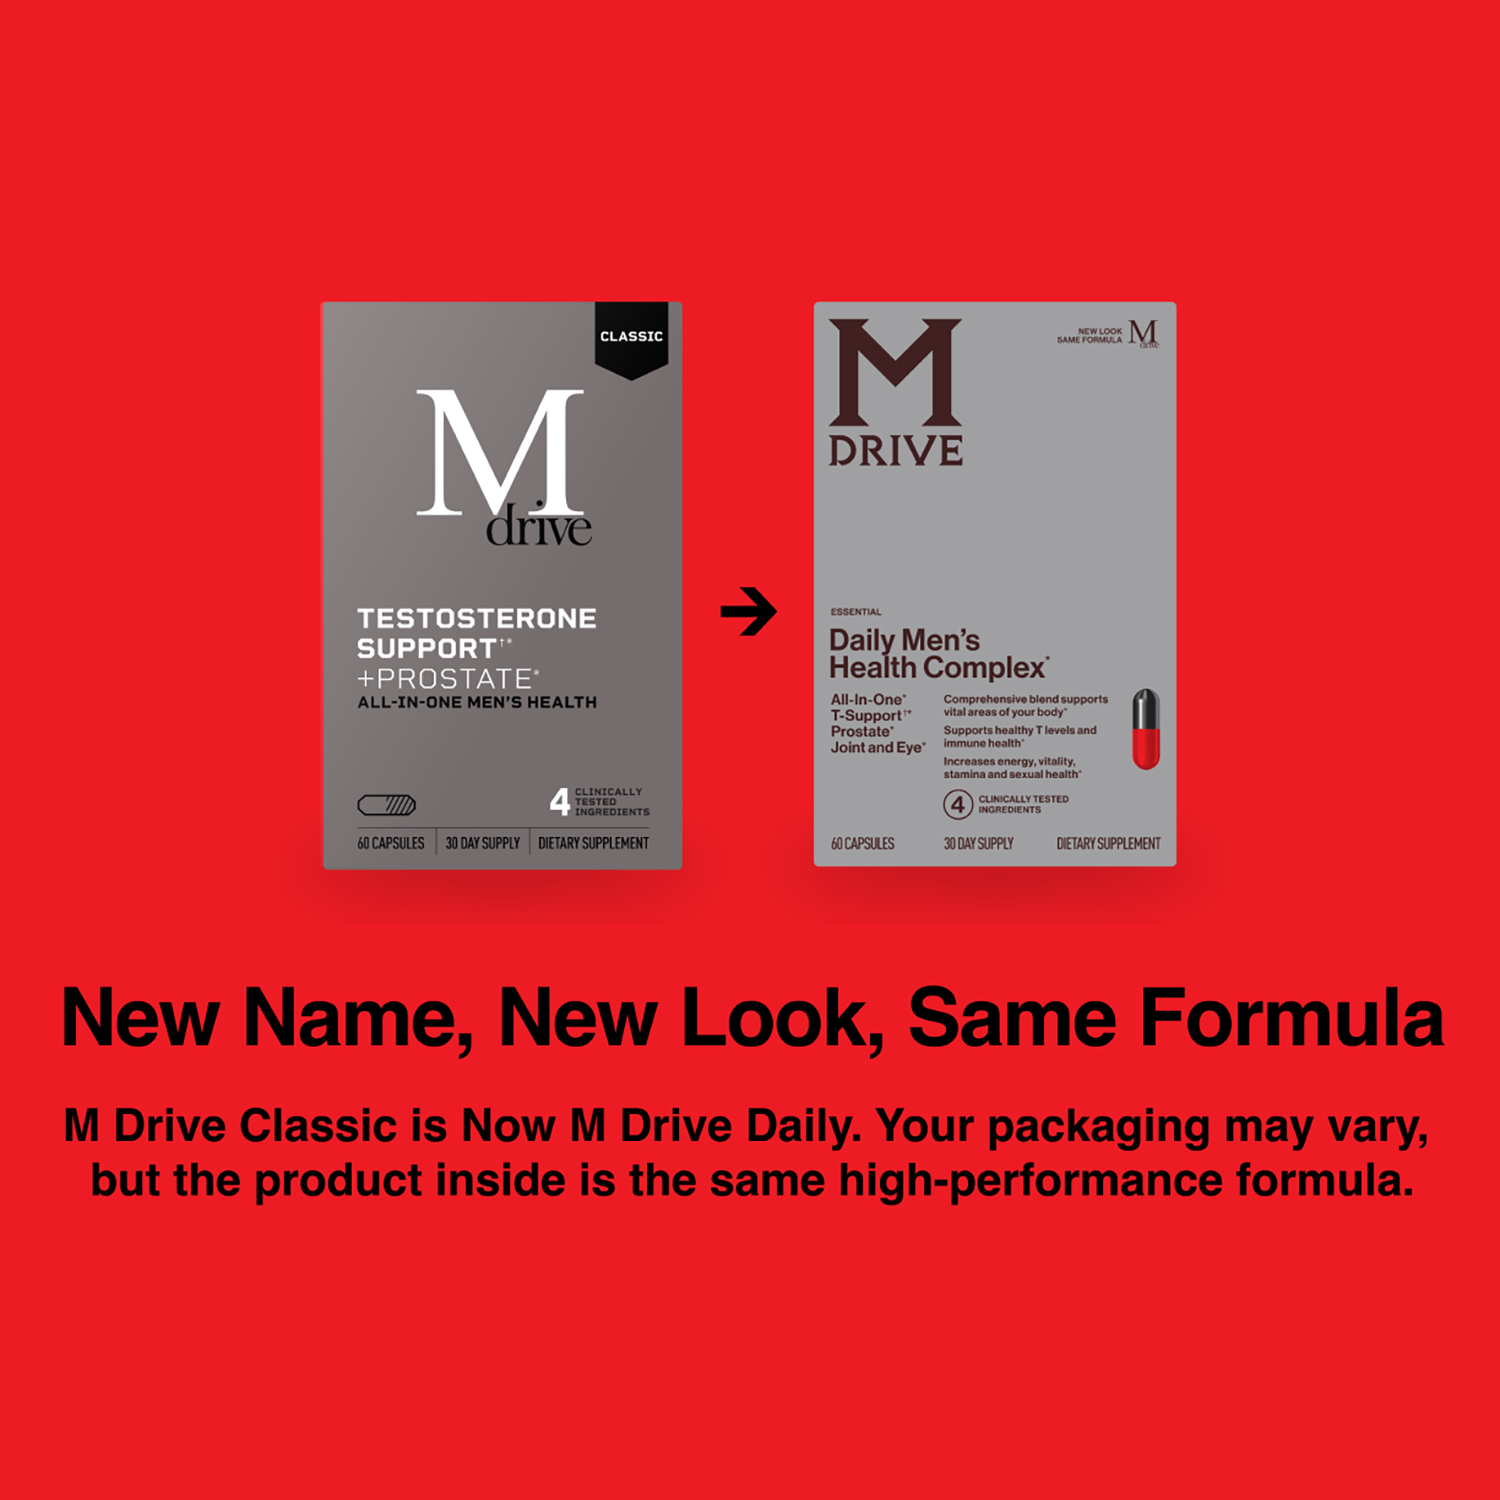 M Drive Daily Classic New Name, New Look, Same Formula